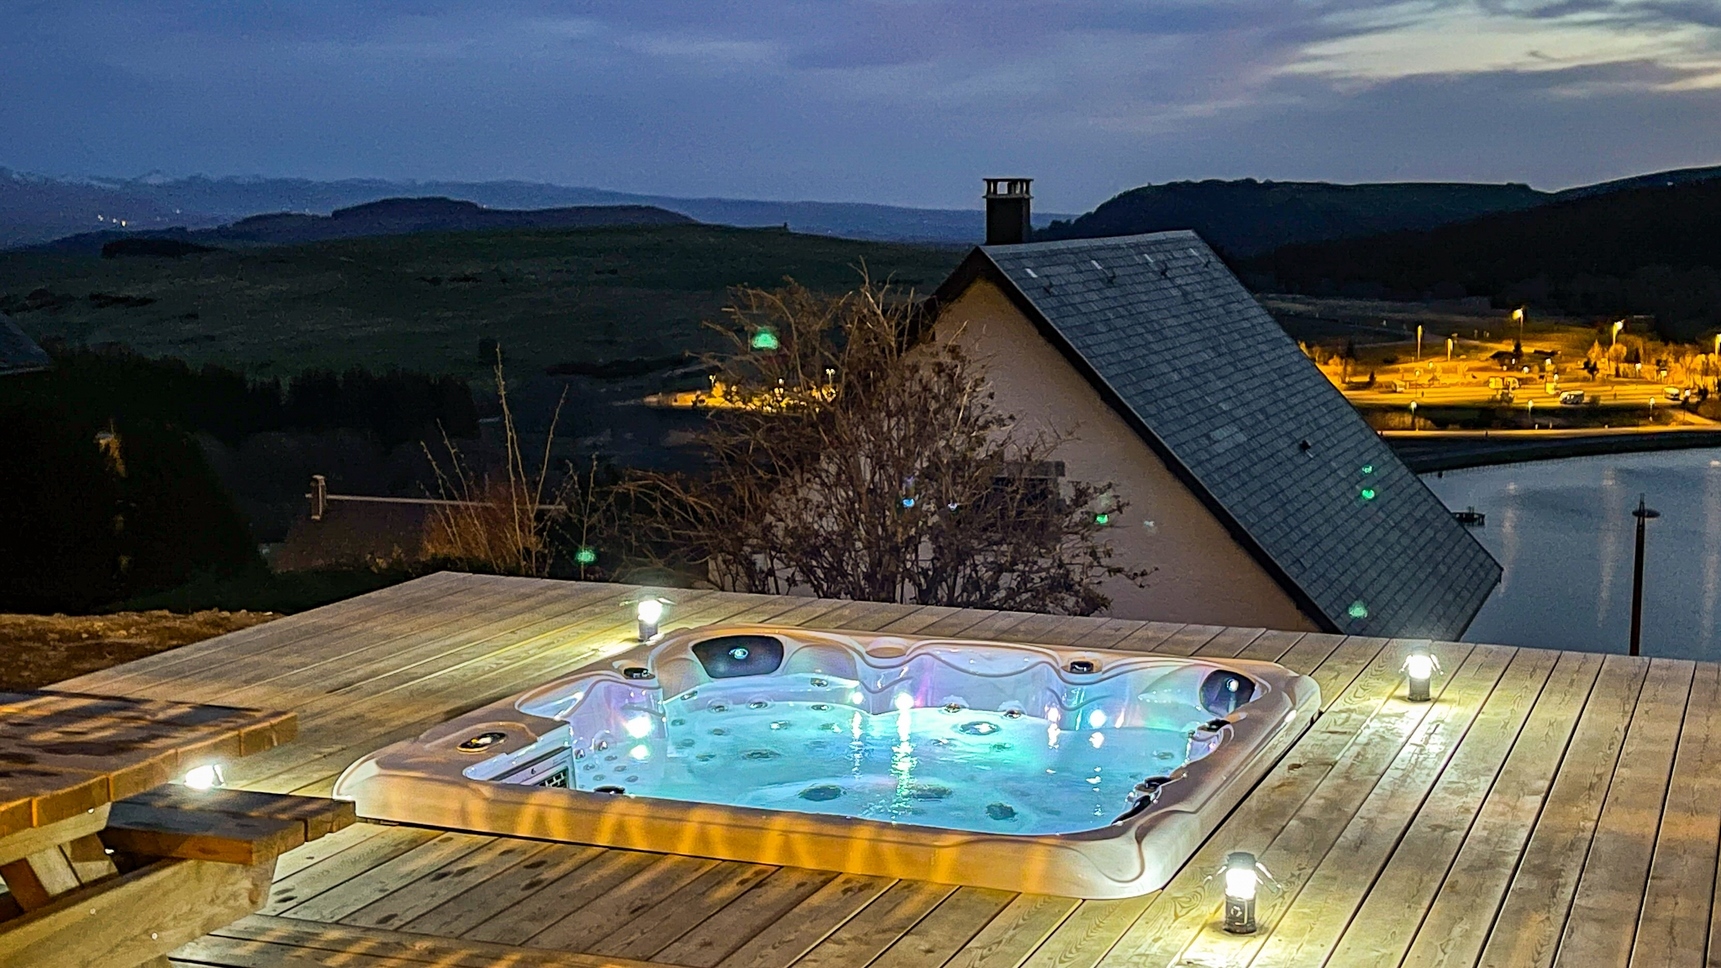 At the beginning of the night, enjoy the Jacuzzi at Chalet l'Anorak in Super Besse